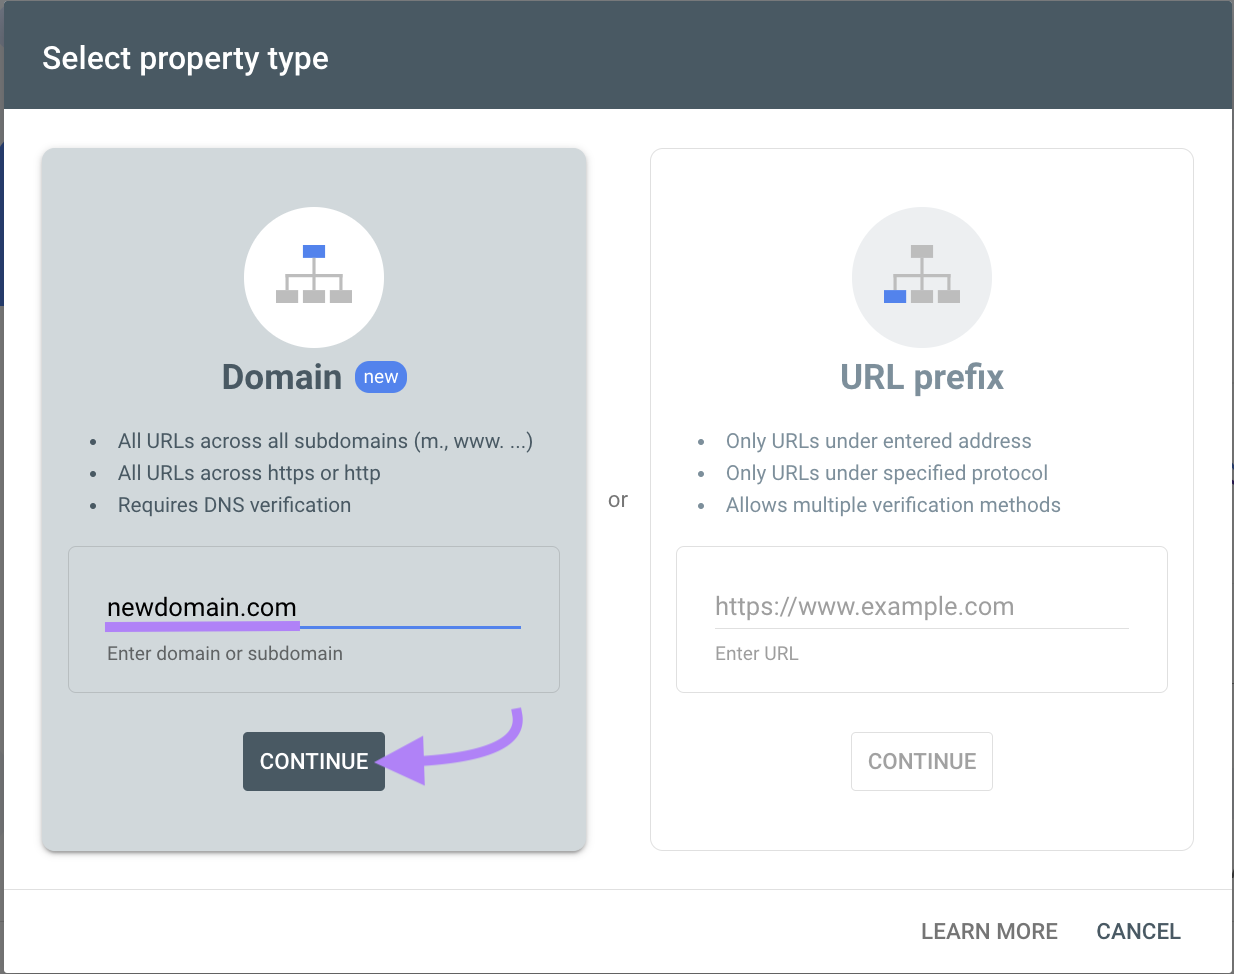 "Domain" selected from the "Select property type" window in Google Search Console